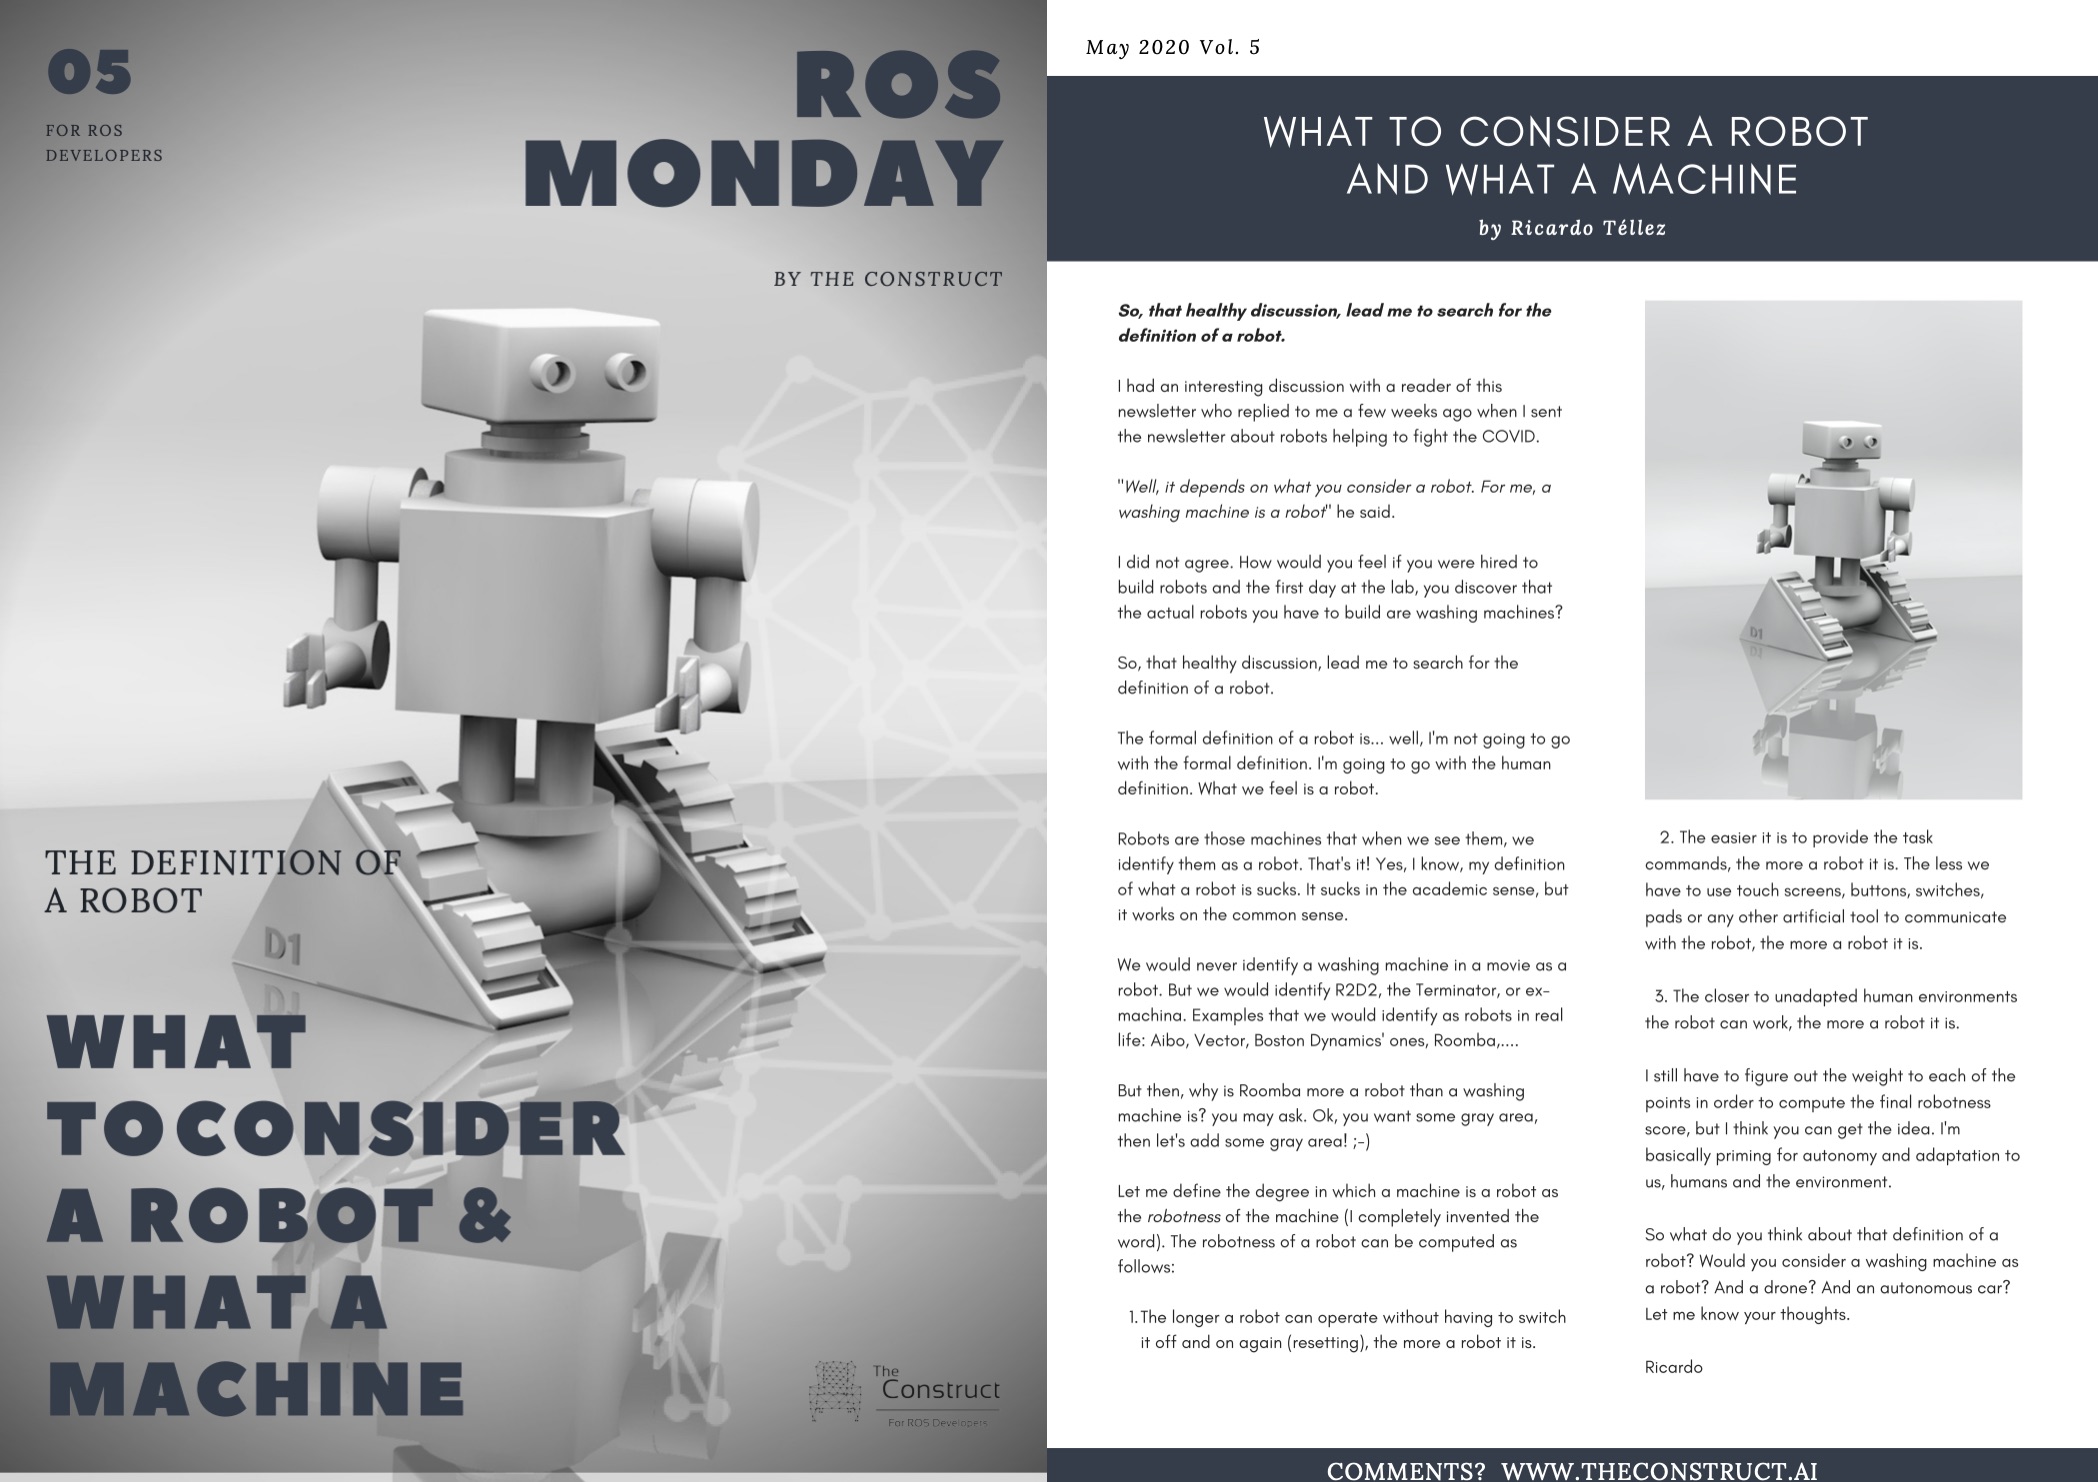 ROS Monday Vol.5 – What to consider a robot and what a machine